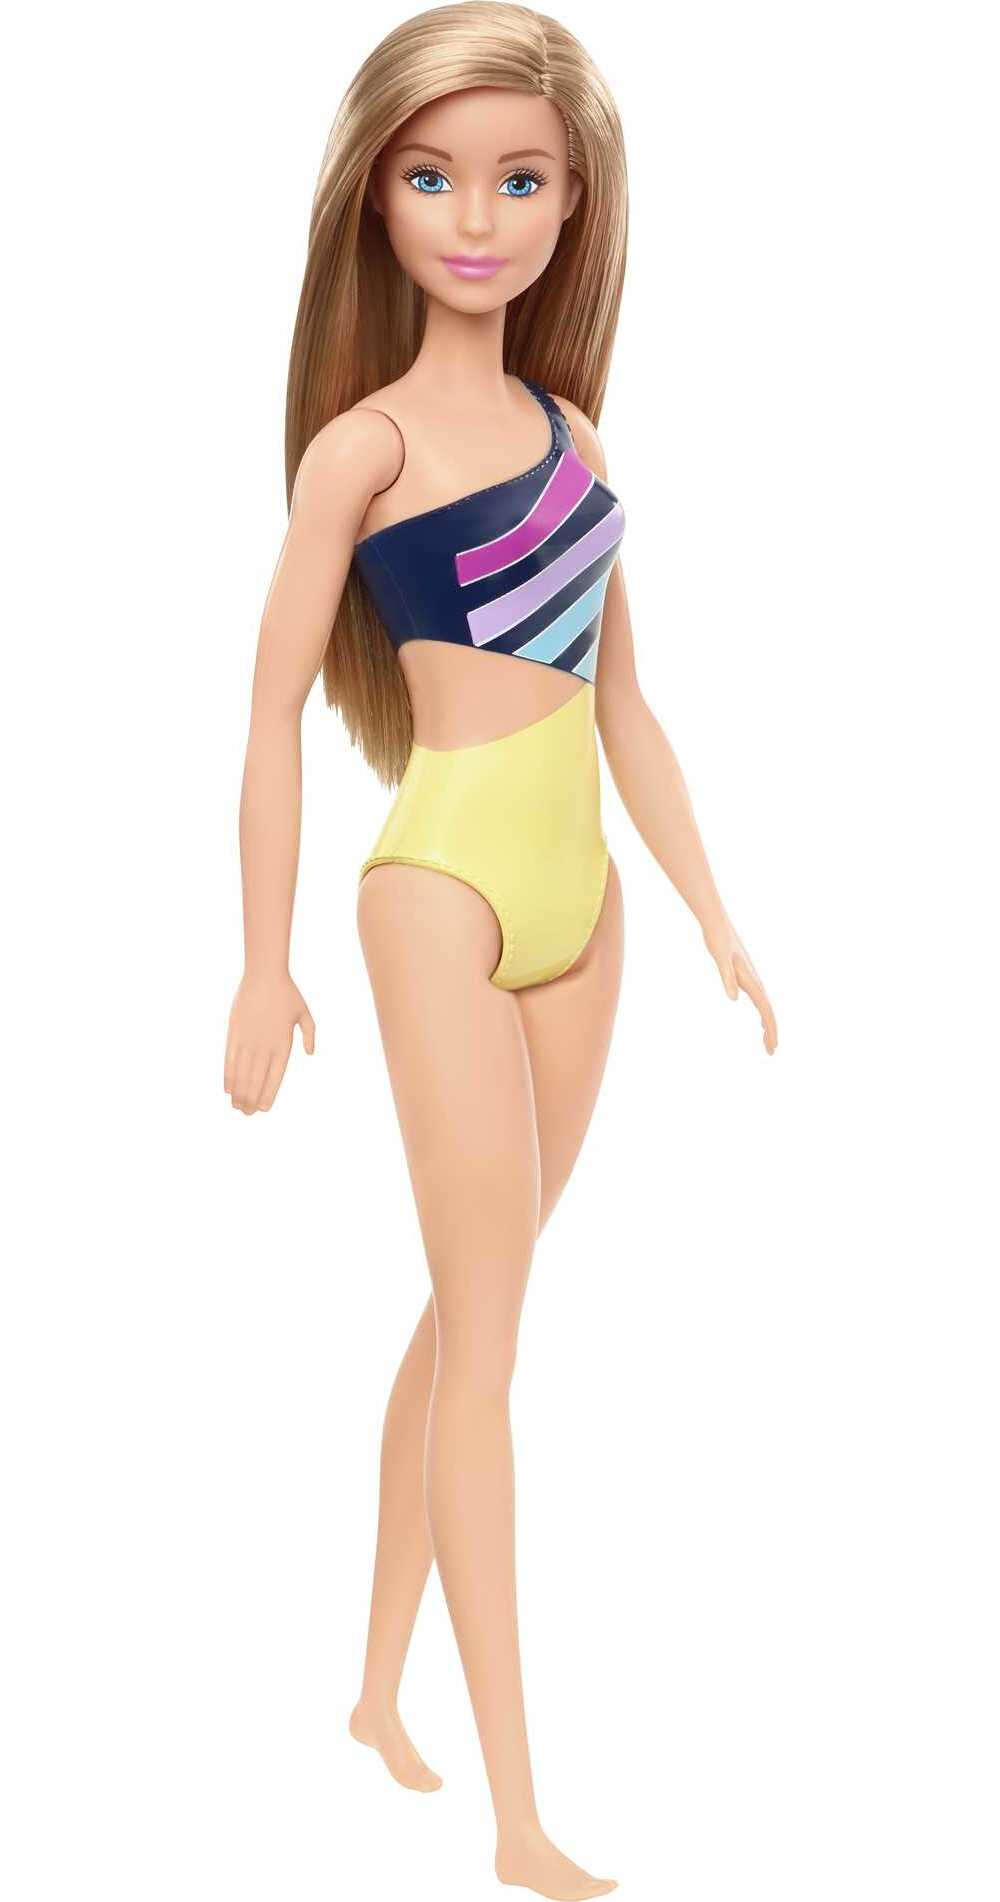 Barbie Swimsuit Beach Doll with Blonde Hair & Striped Suit - image 1 of 6